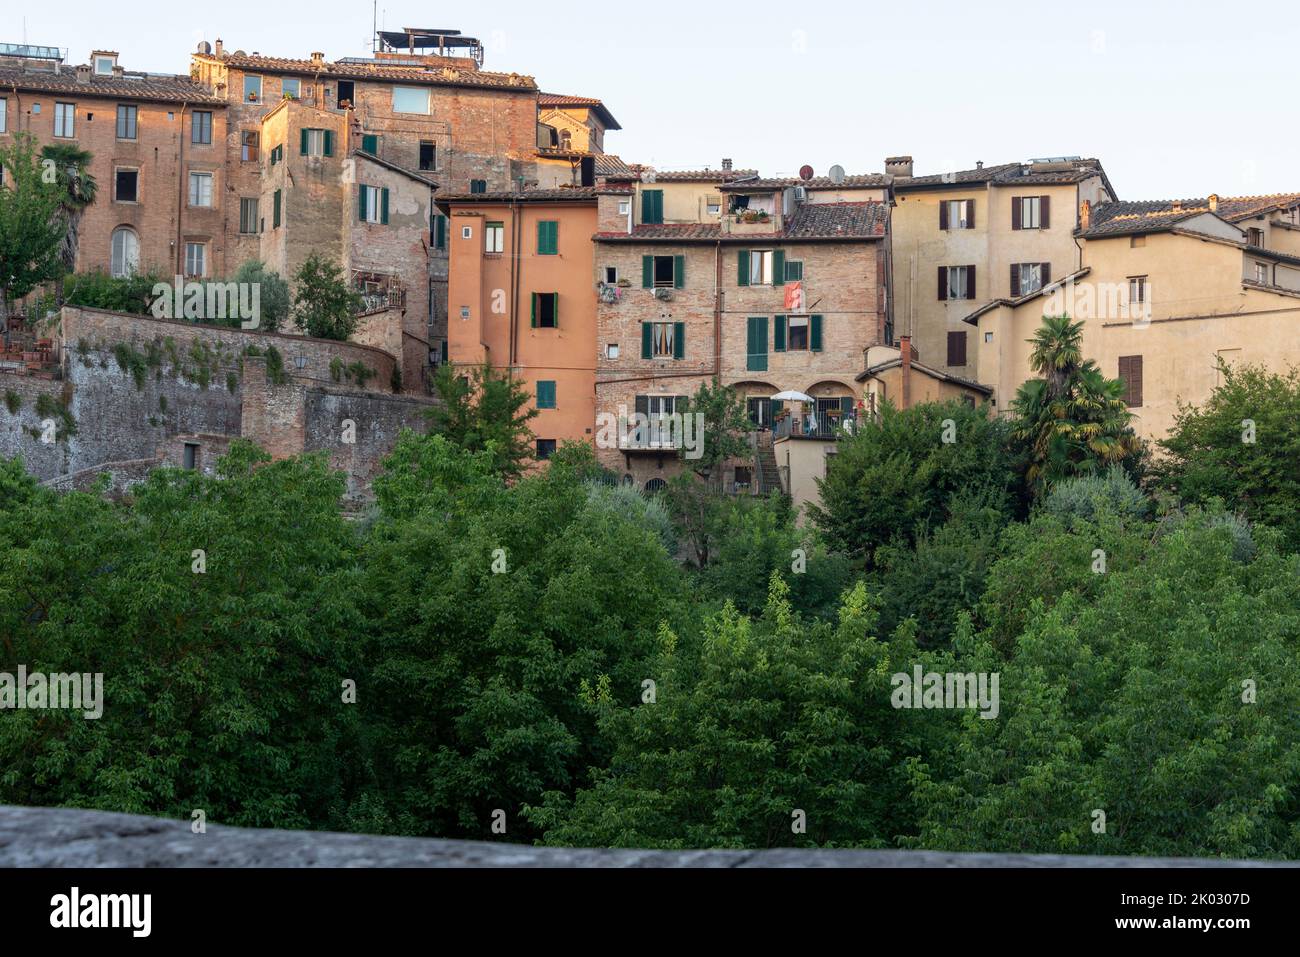 Typical houses in the old town of Siena, Tuscany, Italy Stock Photo